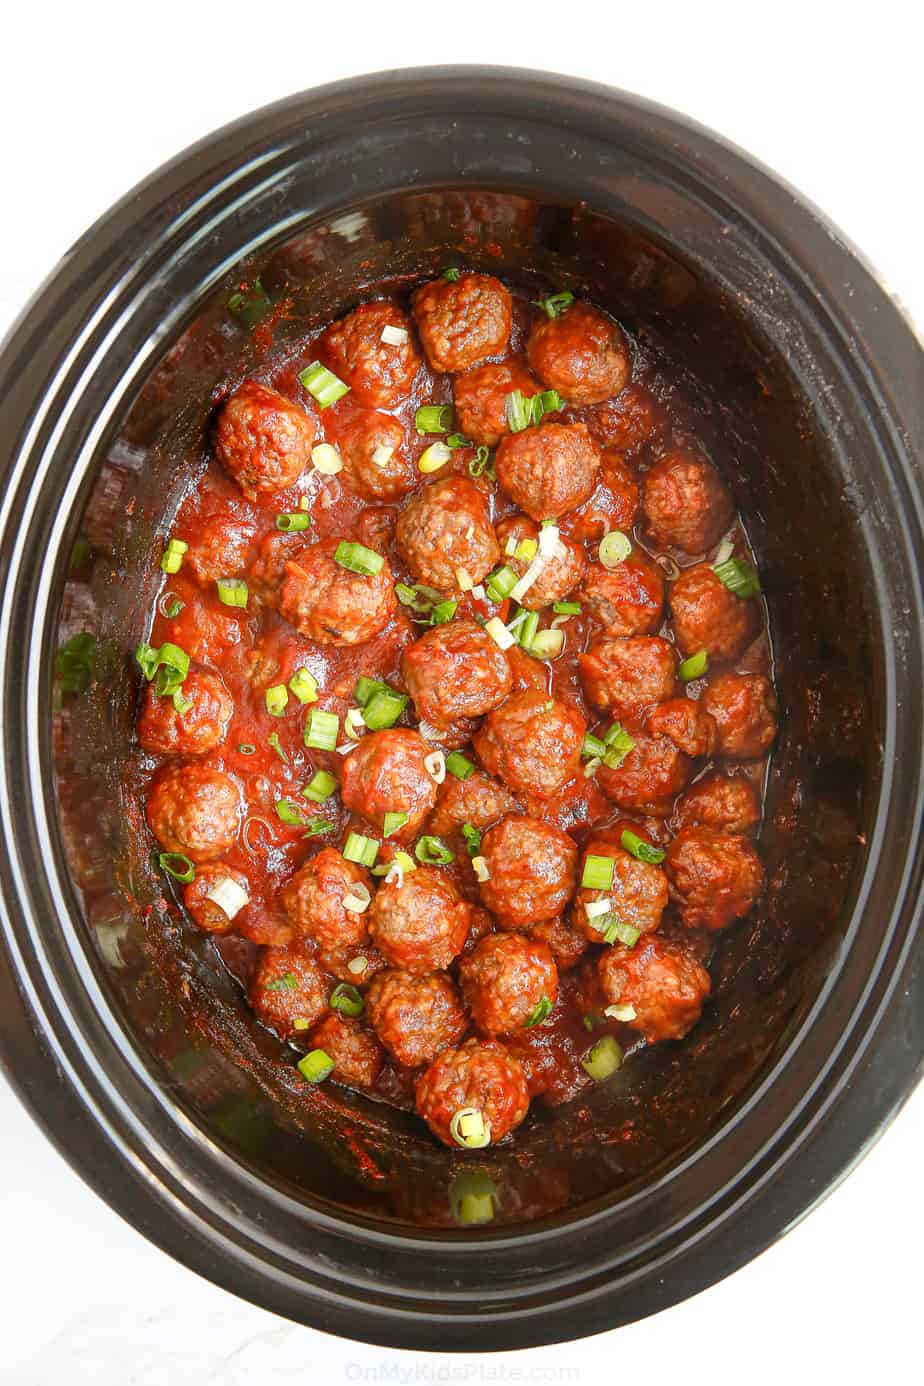 Meatballs in red sauce from overhead in the slow cooker with green onions.